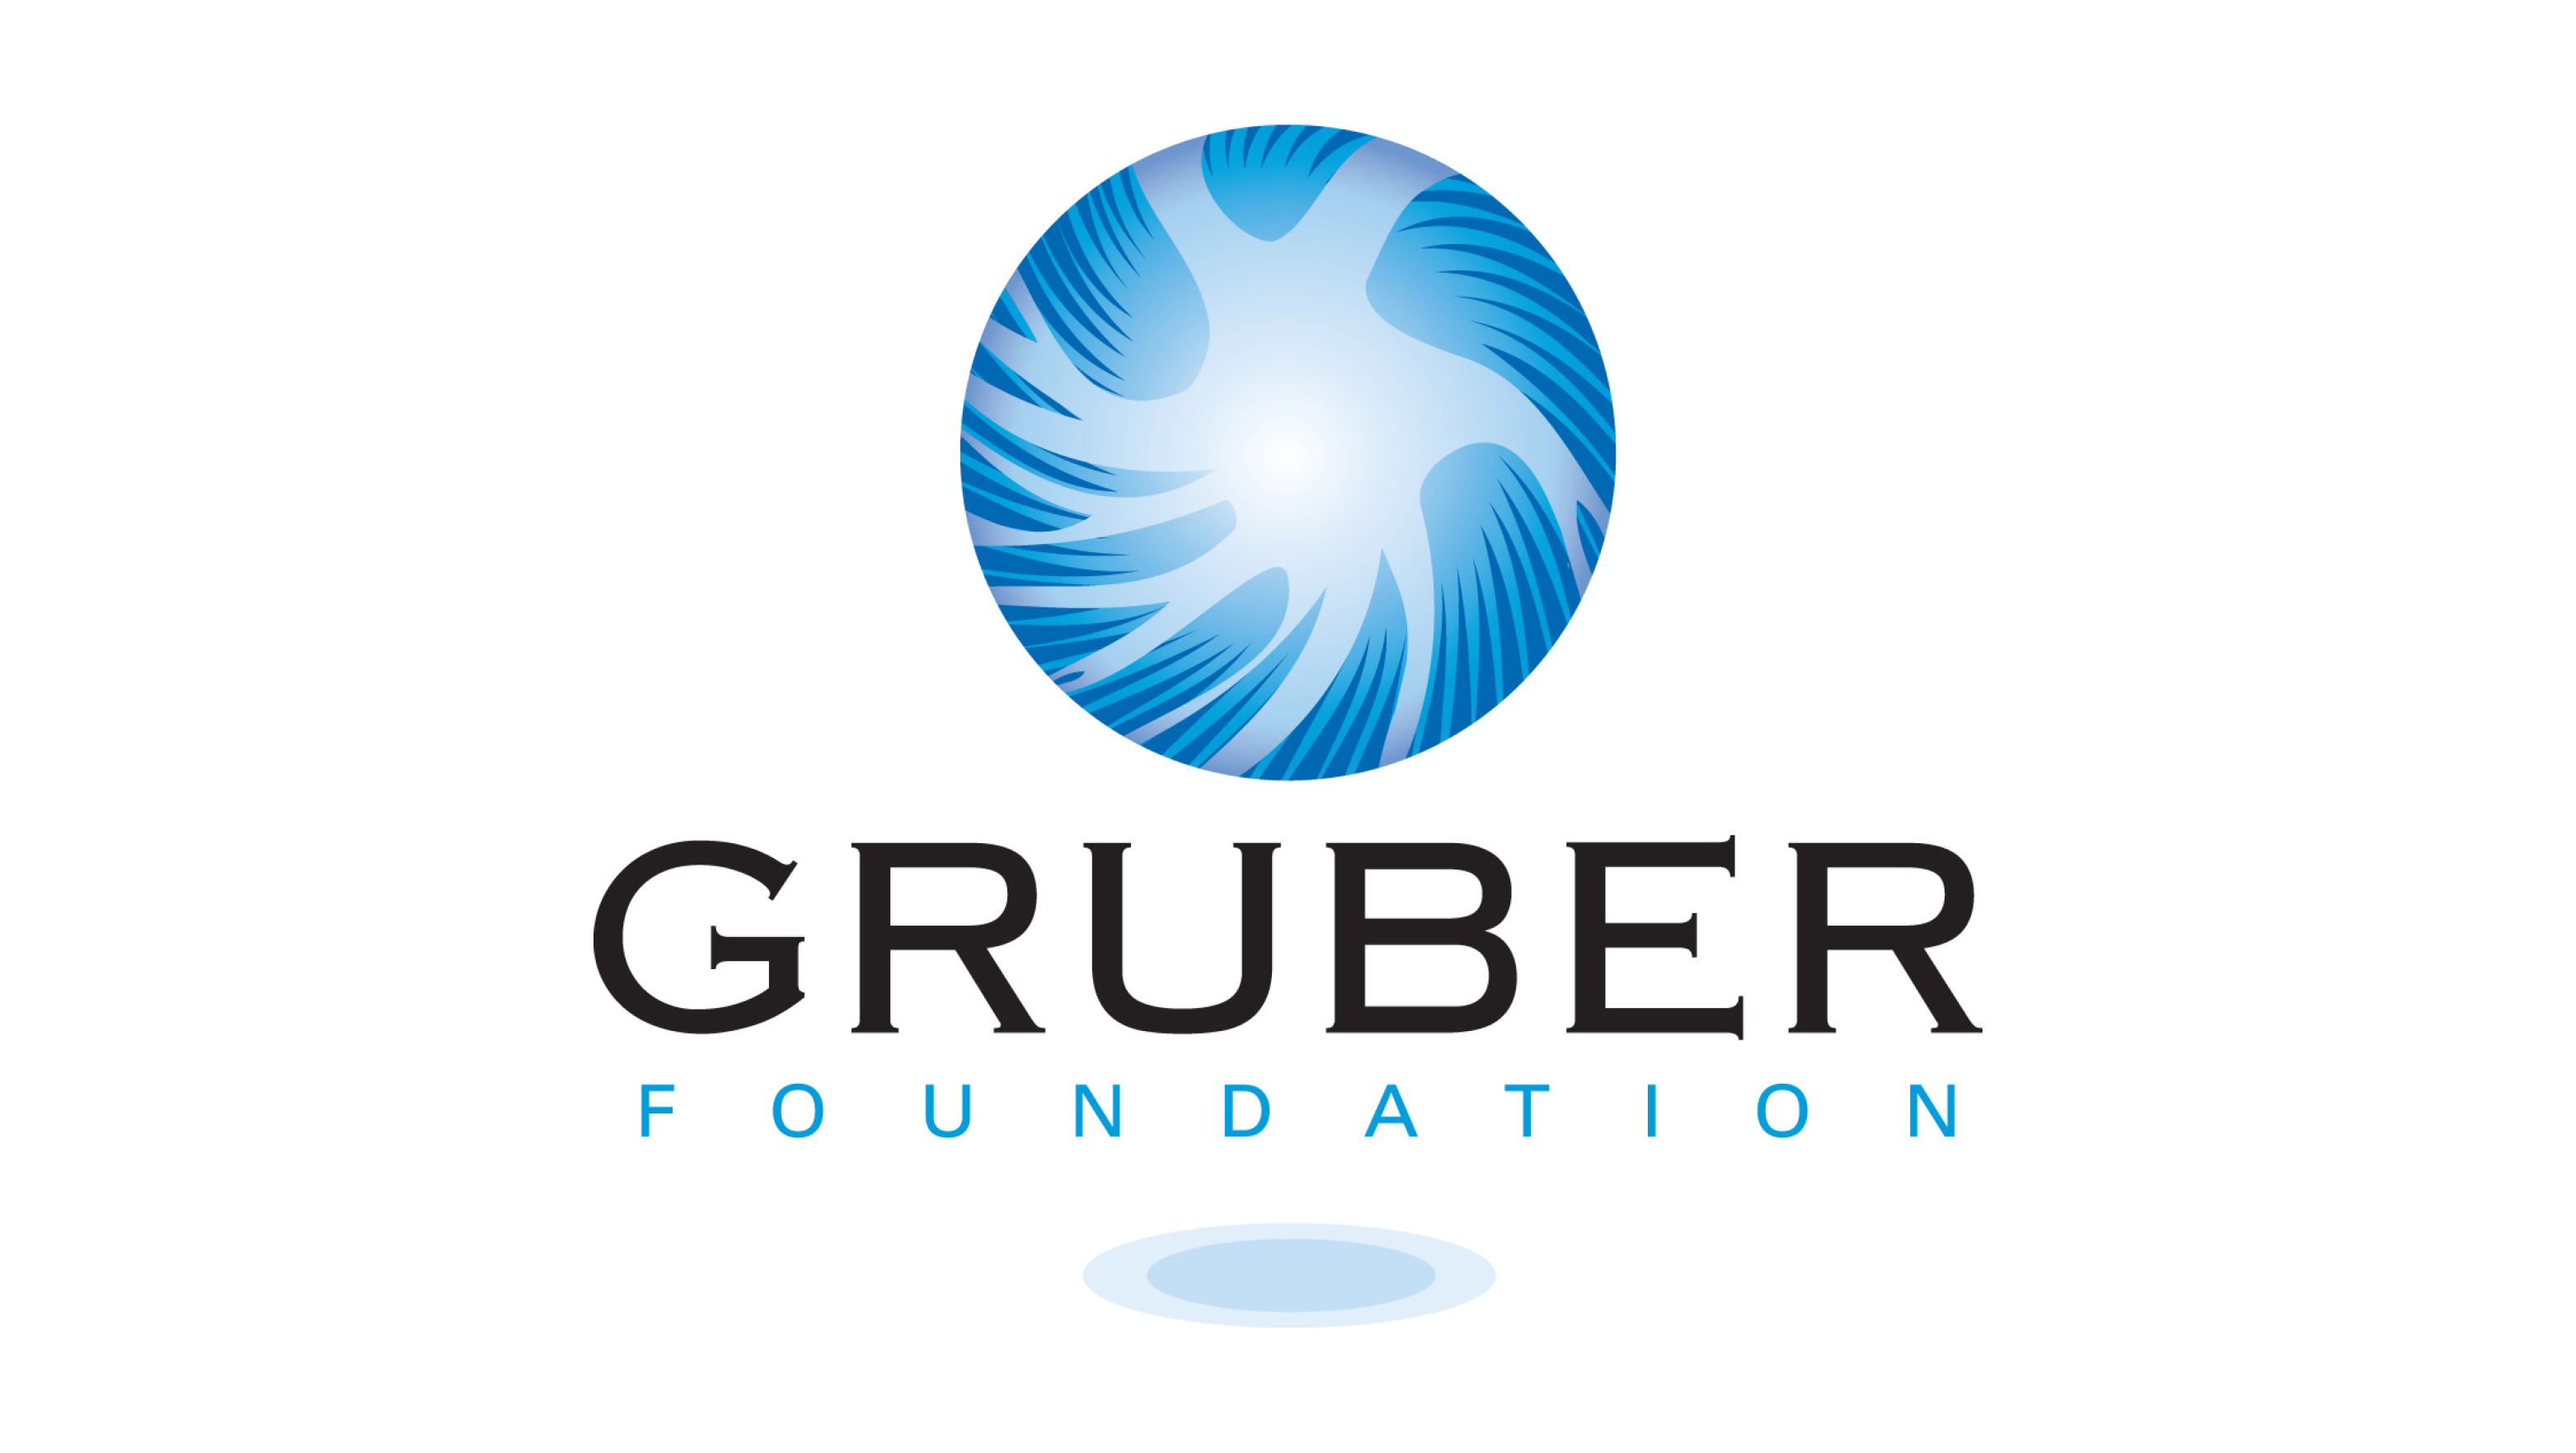 The Gruber Foundation